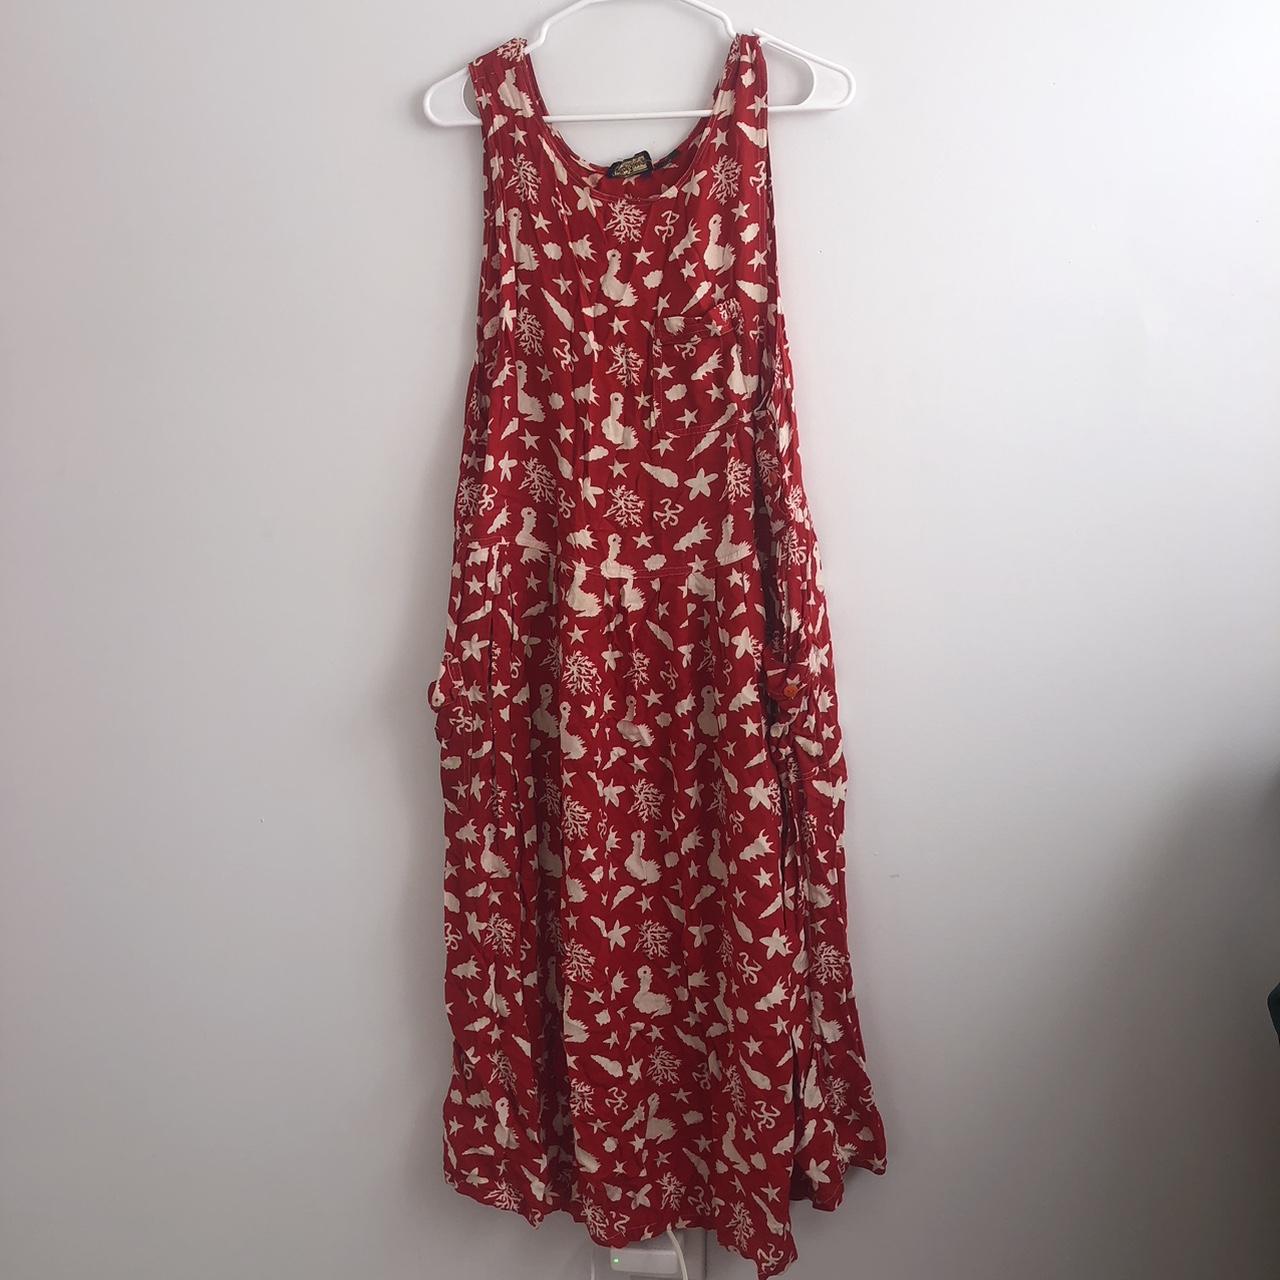 Adorable 90s dead stock midi dress! Perfect for the... - Depop